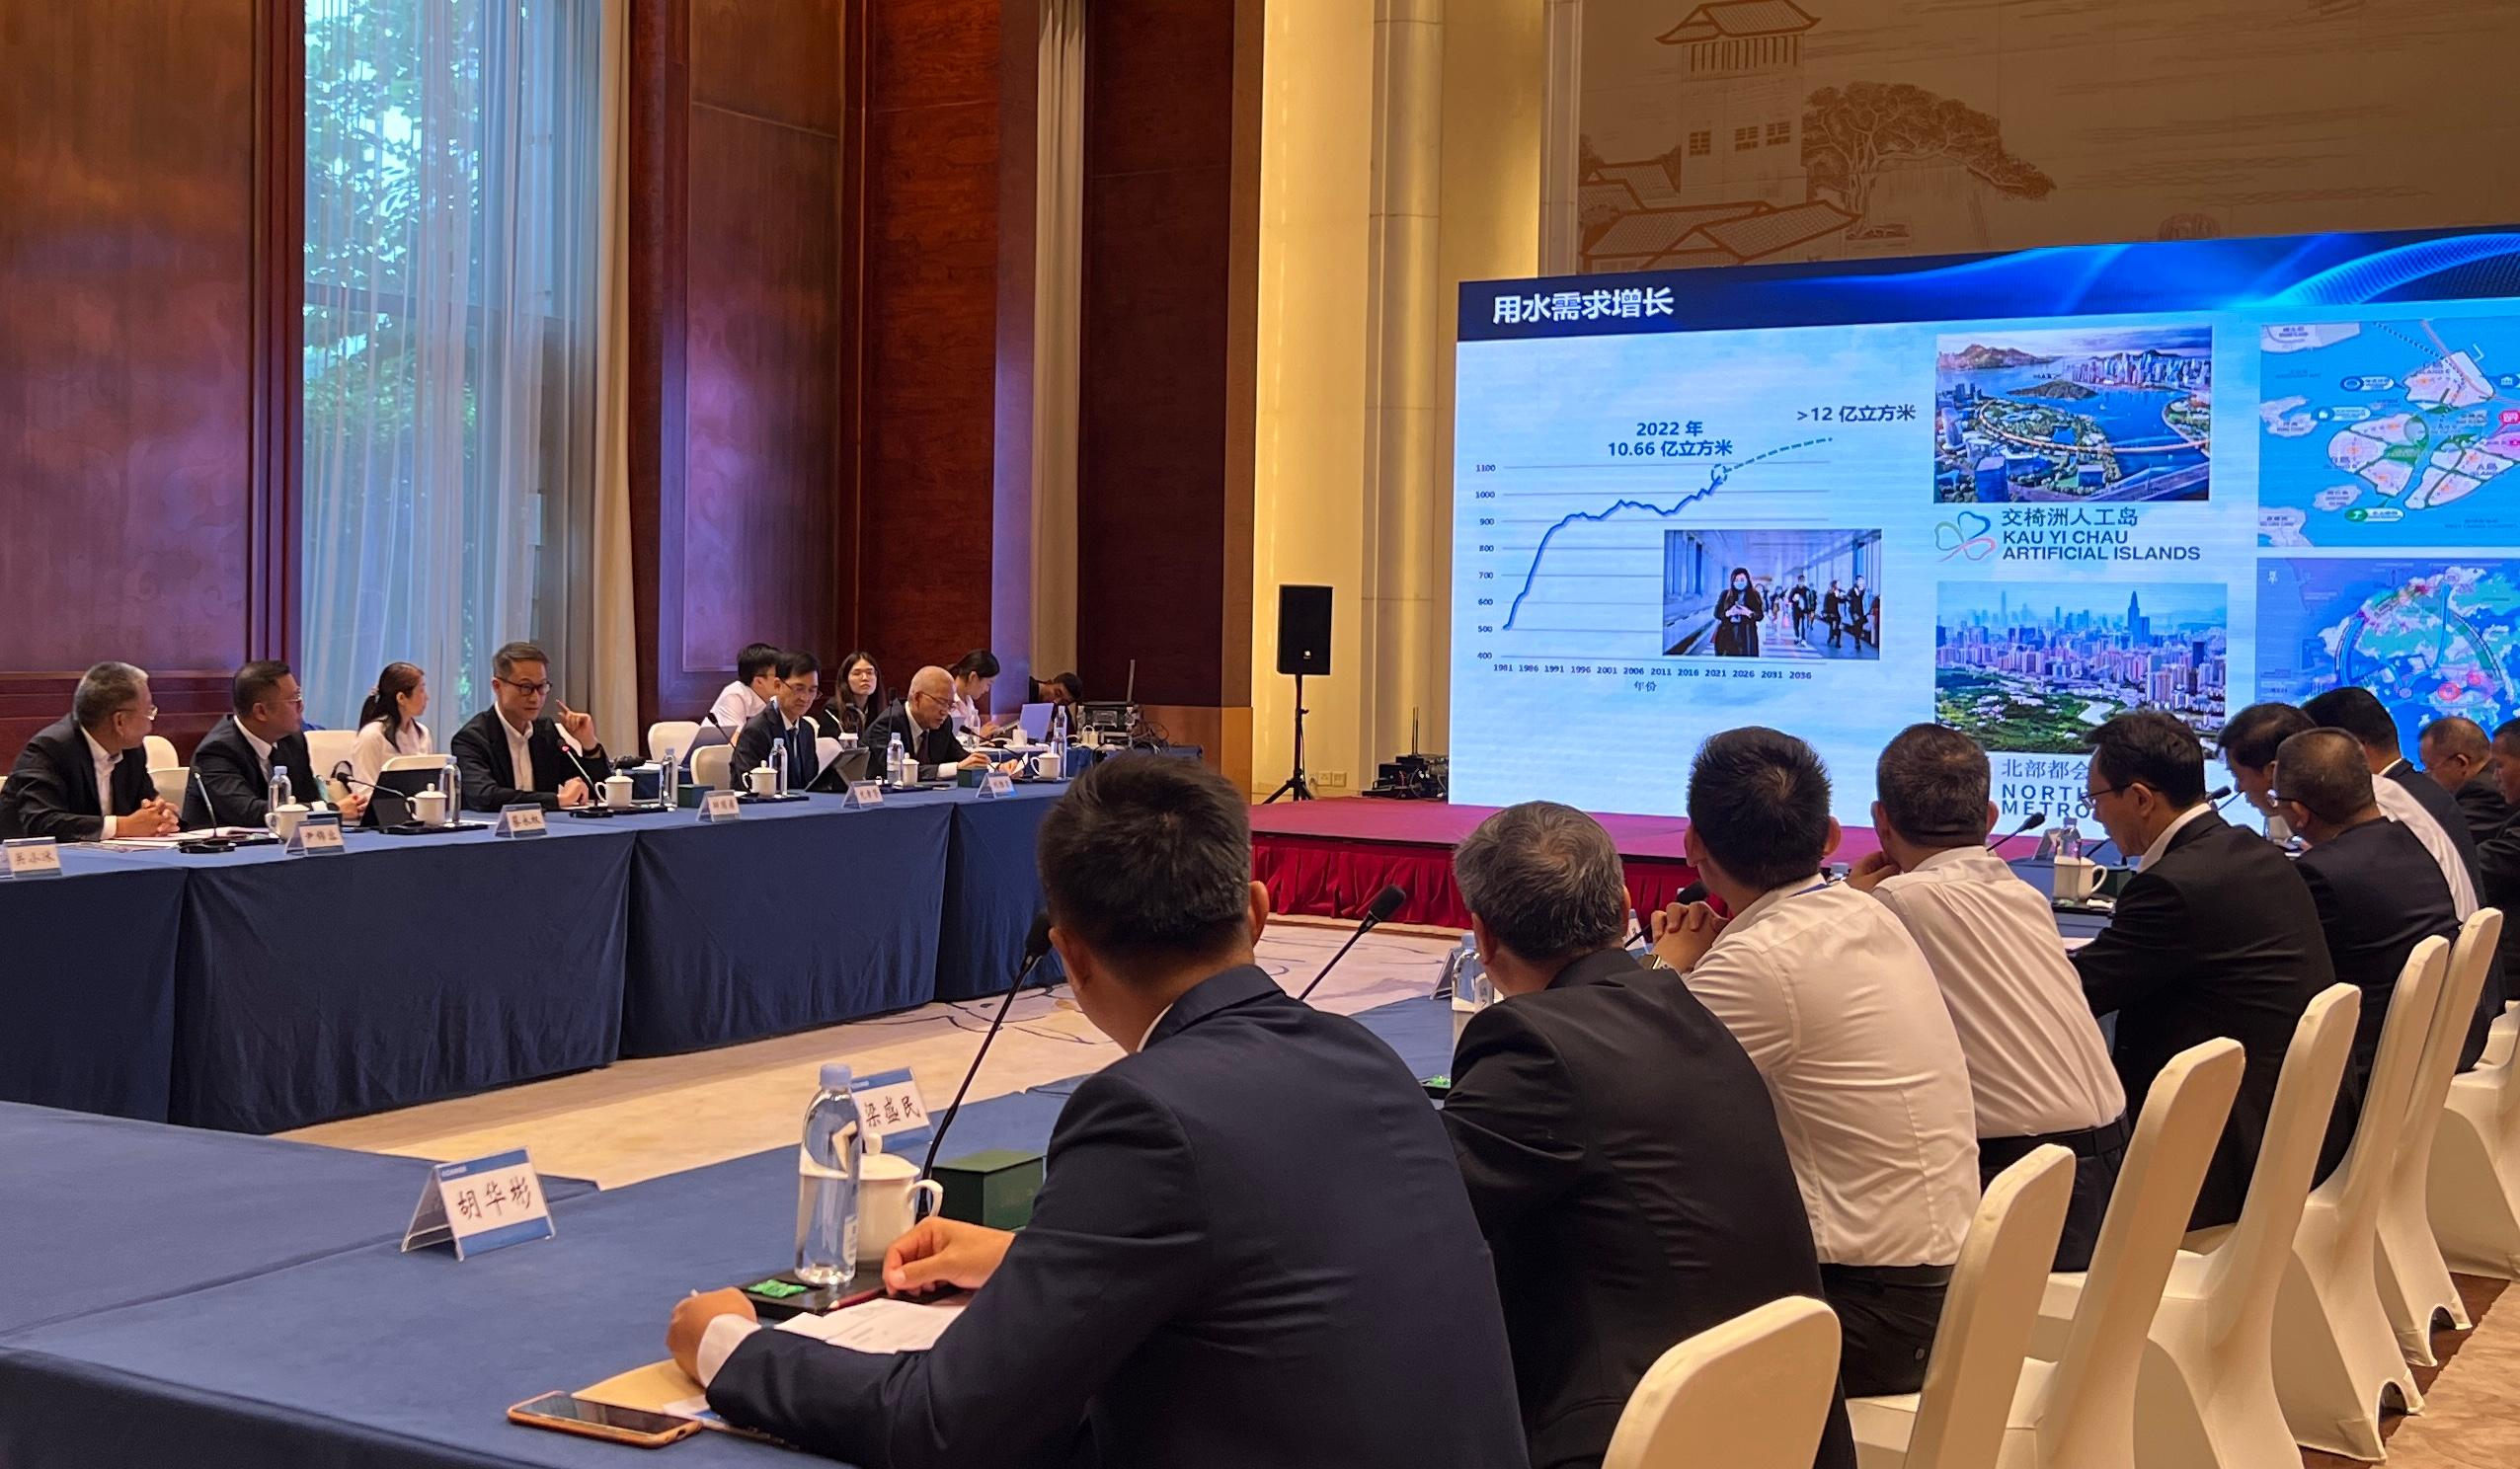 The Director of Water Supplies, Mr Tony Yau, attended the 5th Guangdong-Hong Kong-Macao Greater Bay Area Water Forum in Dongguan from November 8 to 10. Photo shows Mr Yau (fourth left) speaking at the CEO Summit of the forum yesterday (November 9).